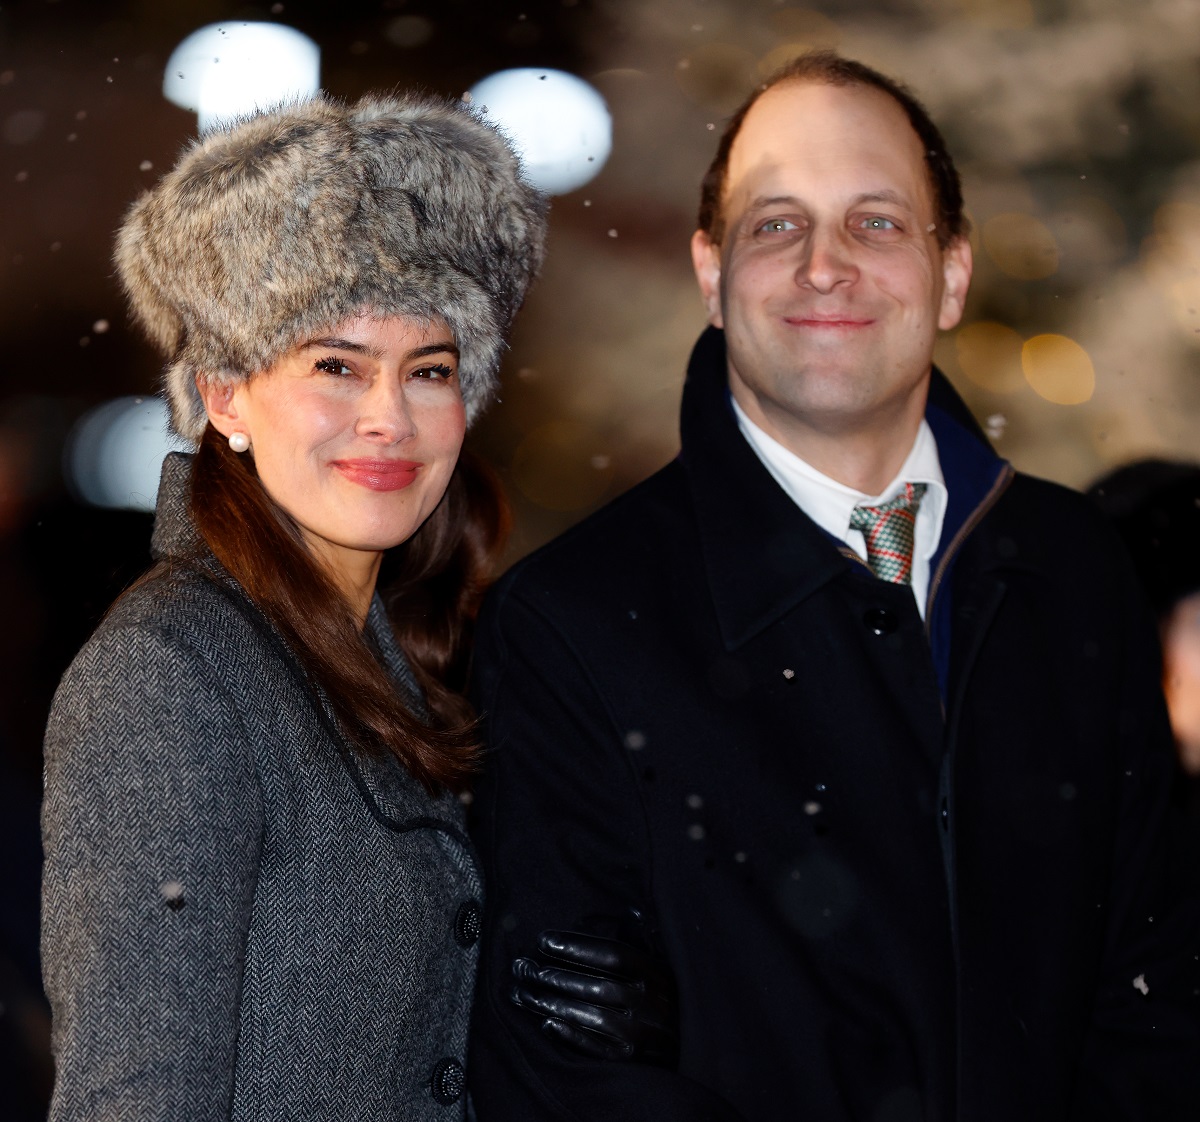 Sophie Winkleman, Lady Frederick Windsor and Lord Frederick Windsor join other royals at the 'Together at Christmas' Carol Service held at Westminster Abbey